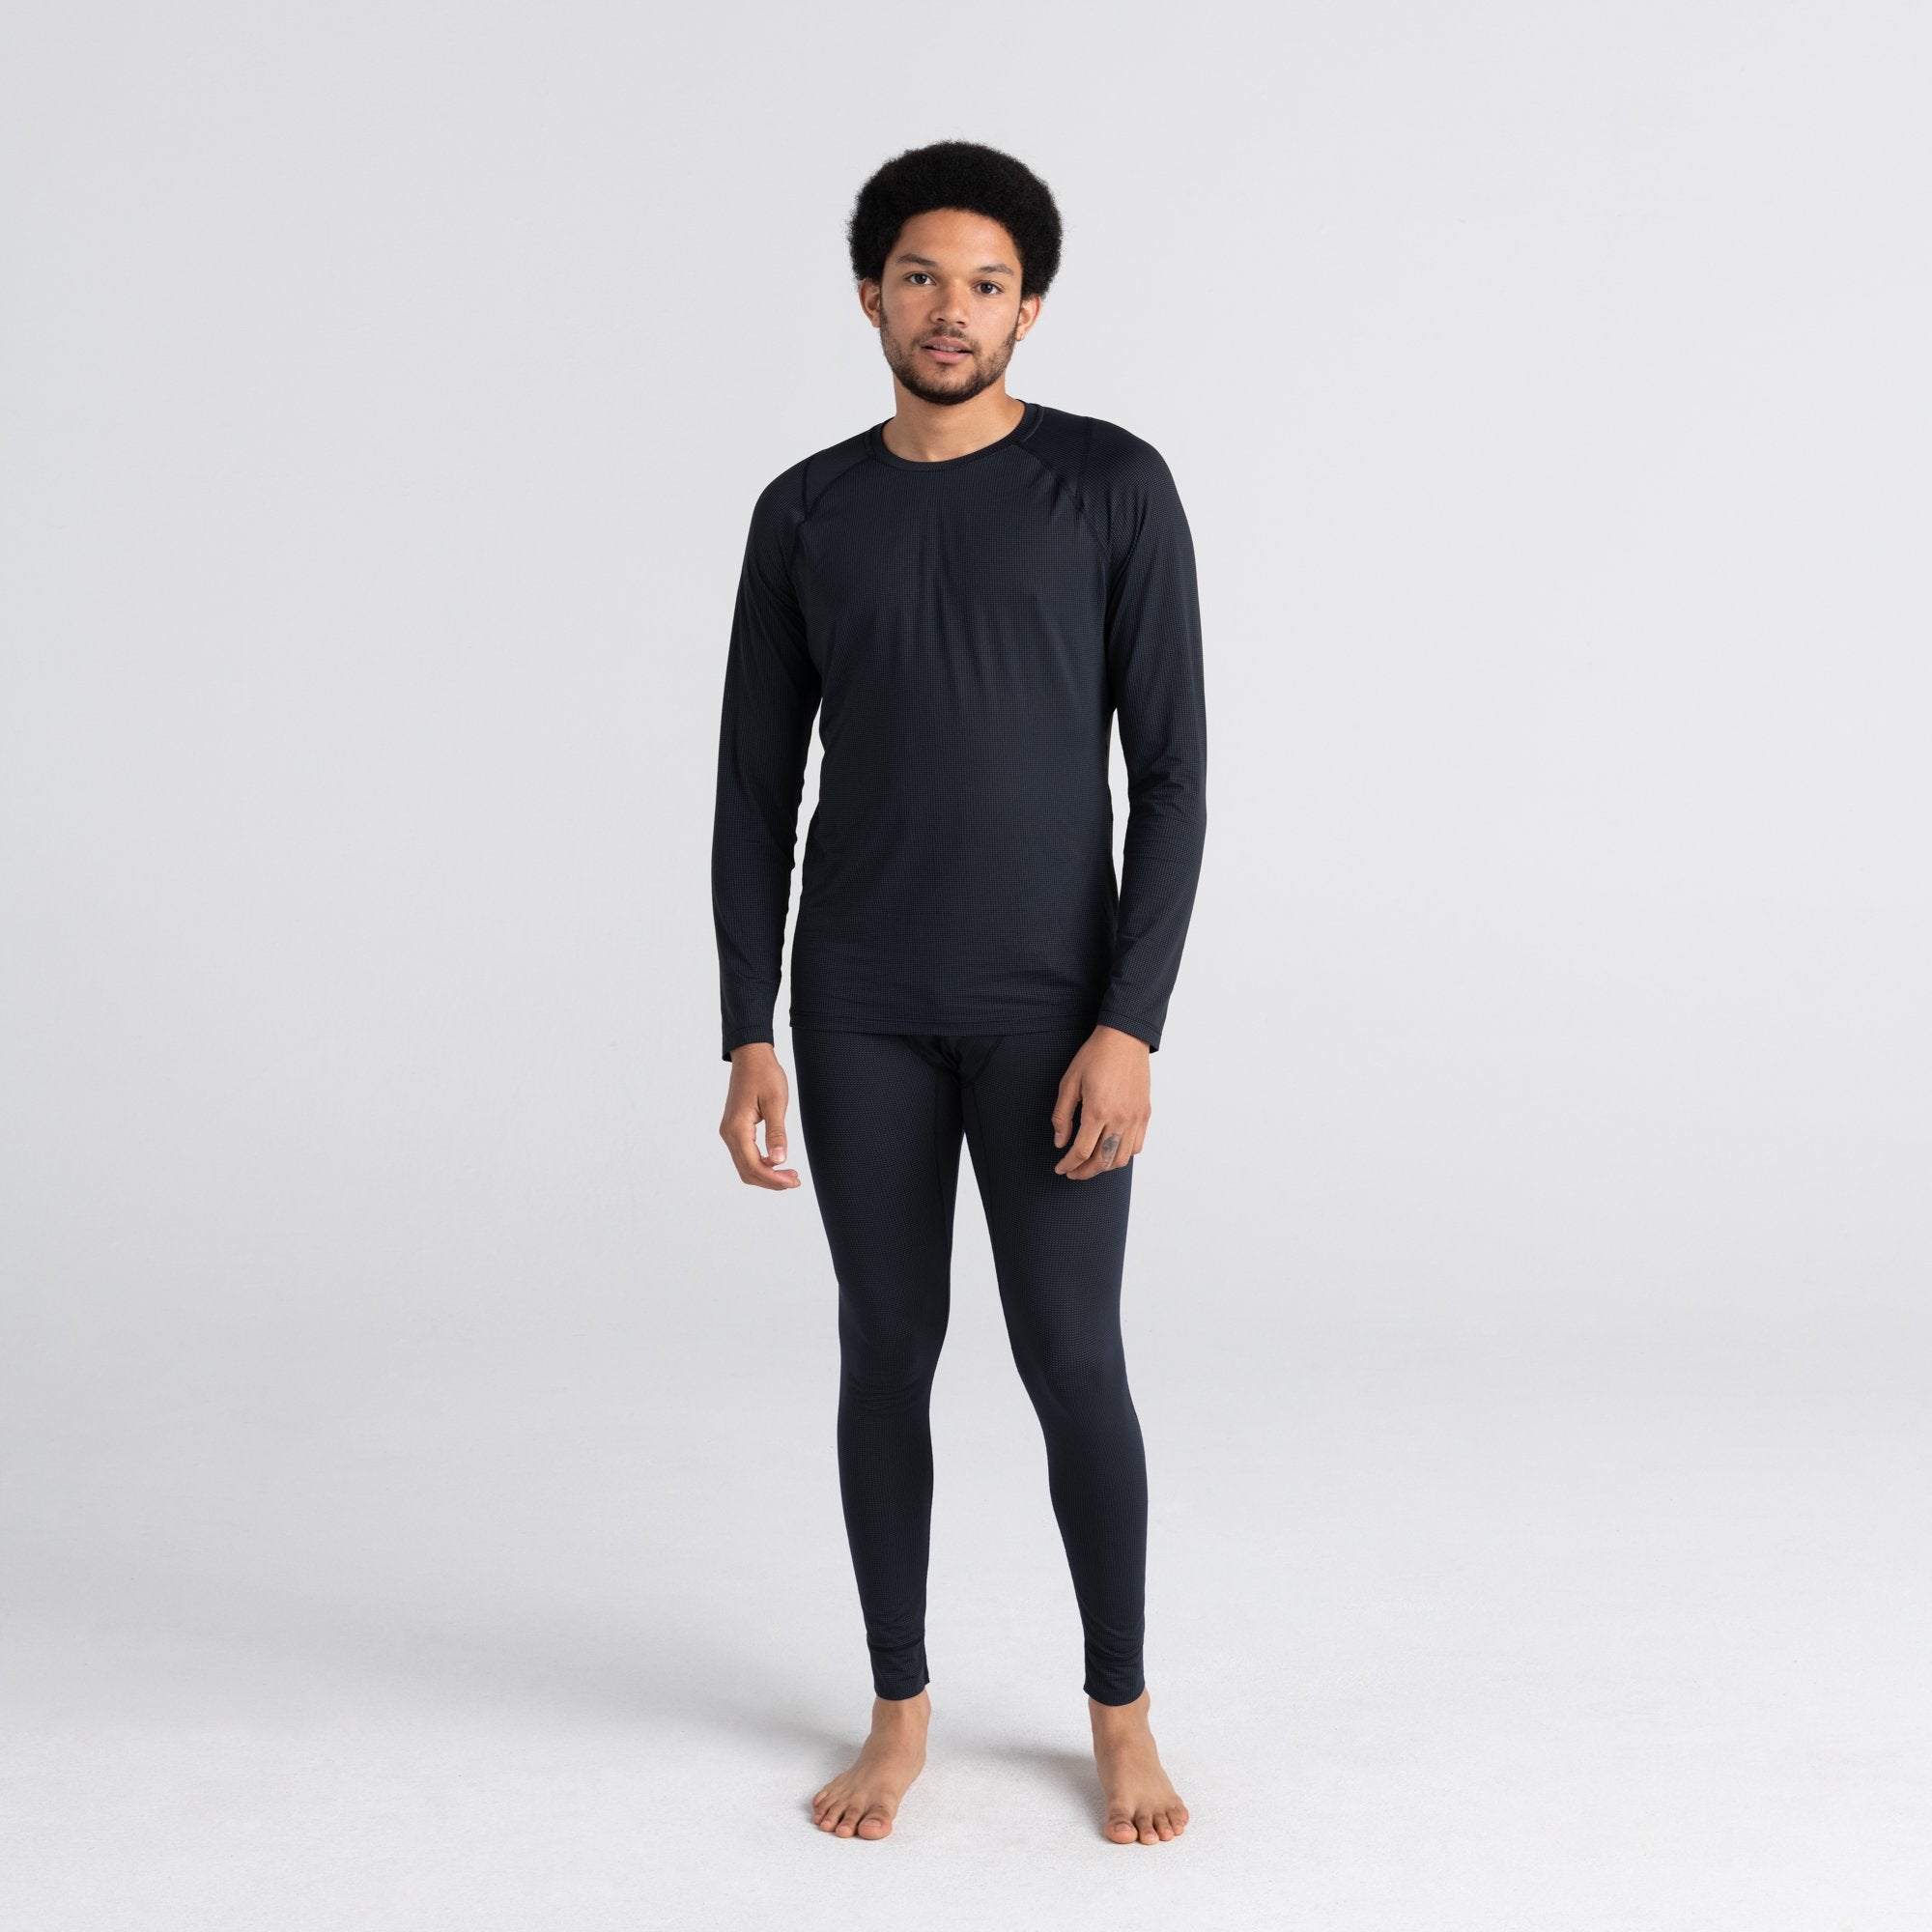 Front - Model wearing Quest Baselayer Tight Fly in Black